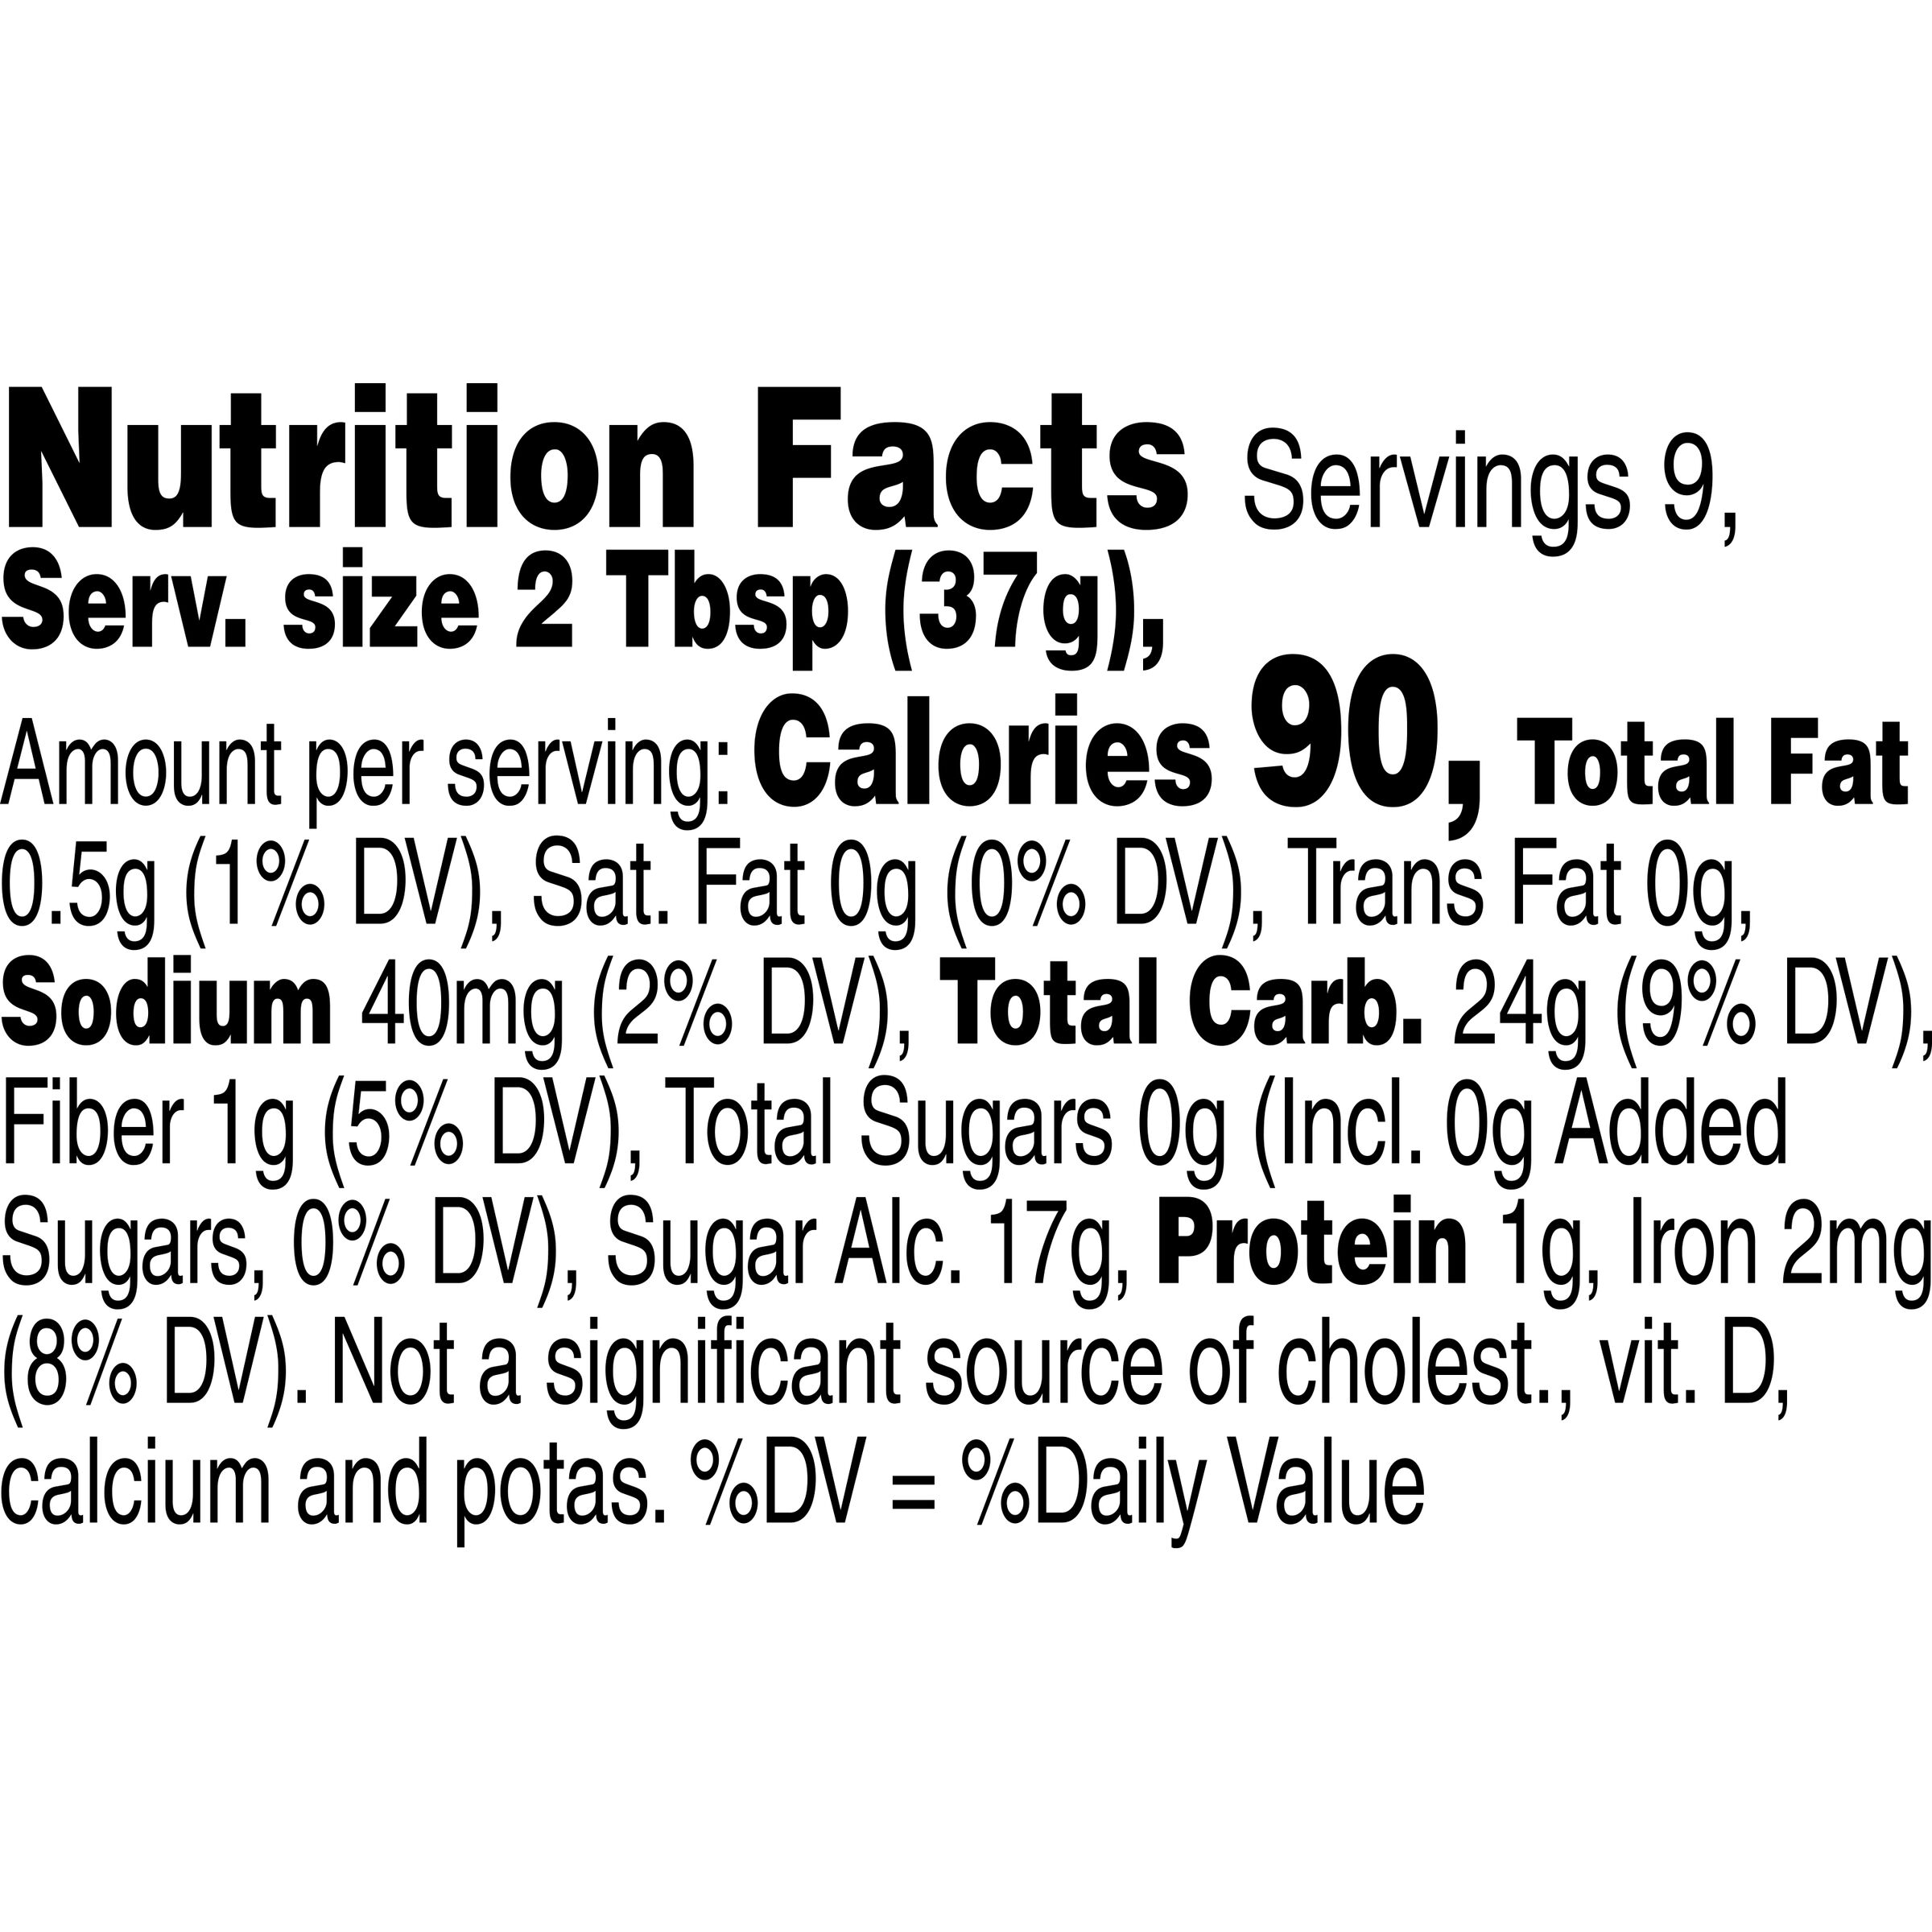 Smucker's Sugar Free Hot Fudge Topping, 11.75 Ounces - image 5 of 6